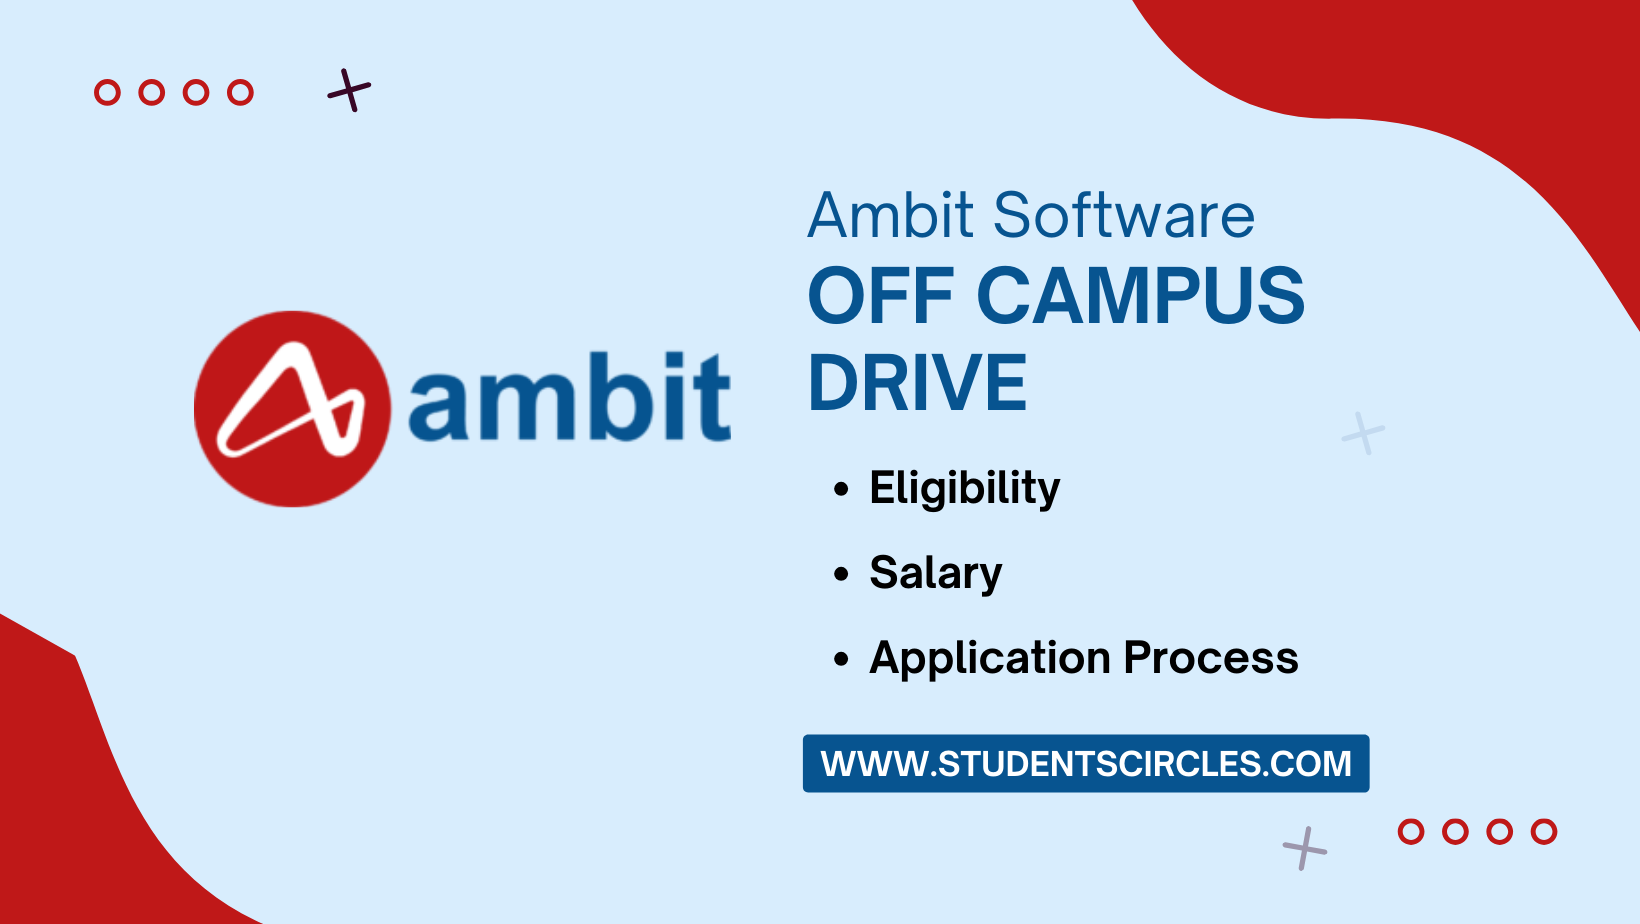 Ambit Software Off Campus Drive